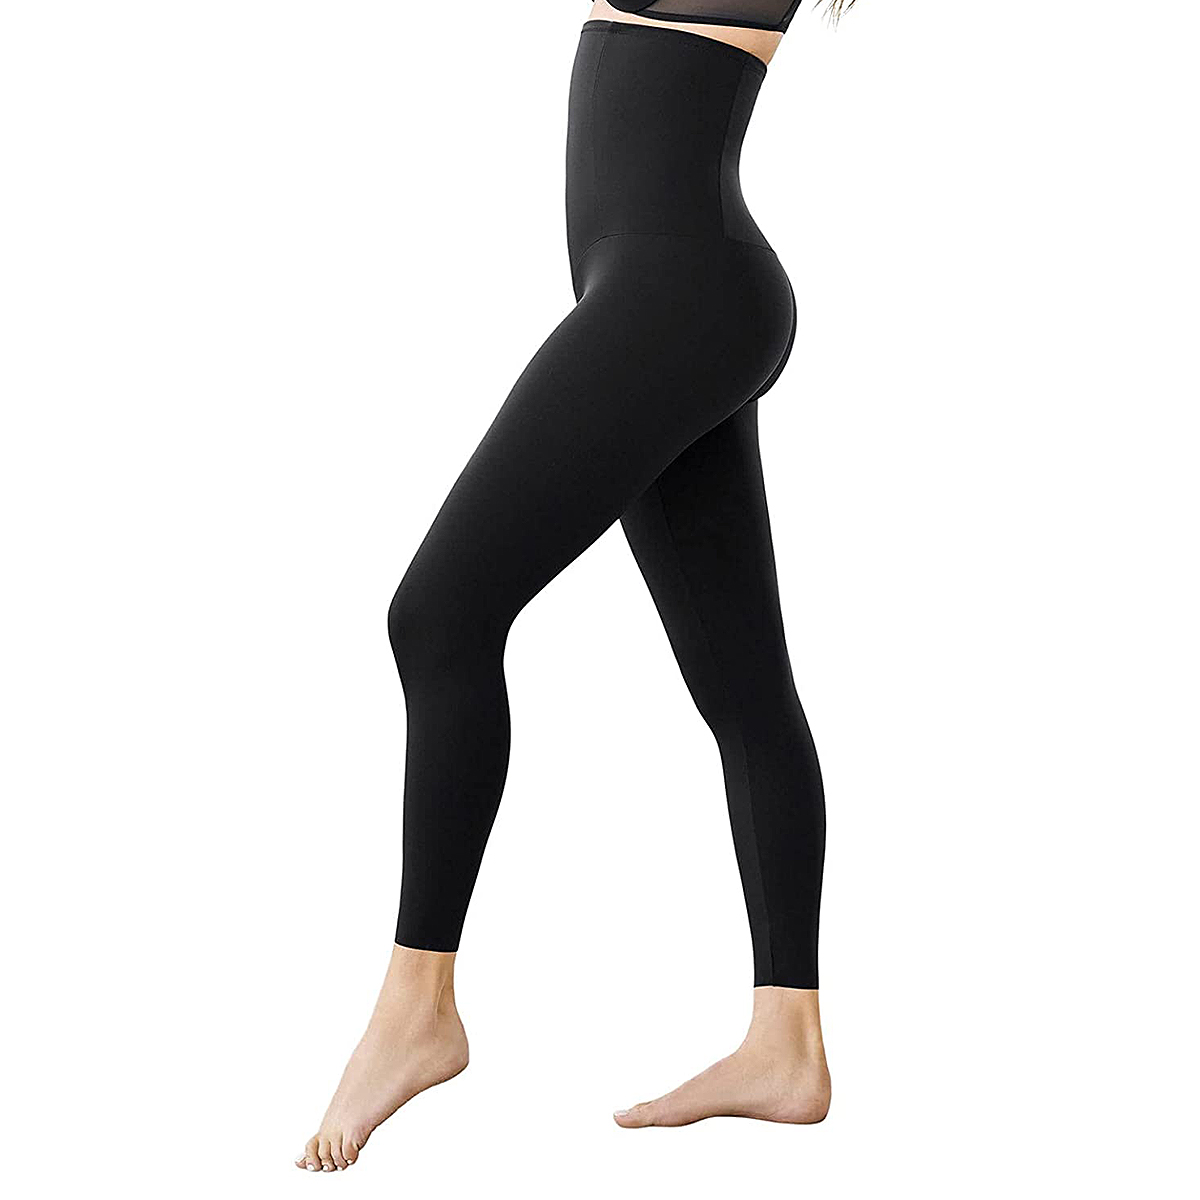 What are the best leggings to hide cellulite? - Quora